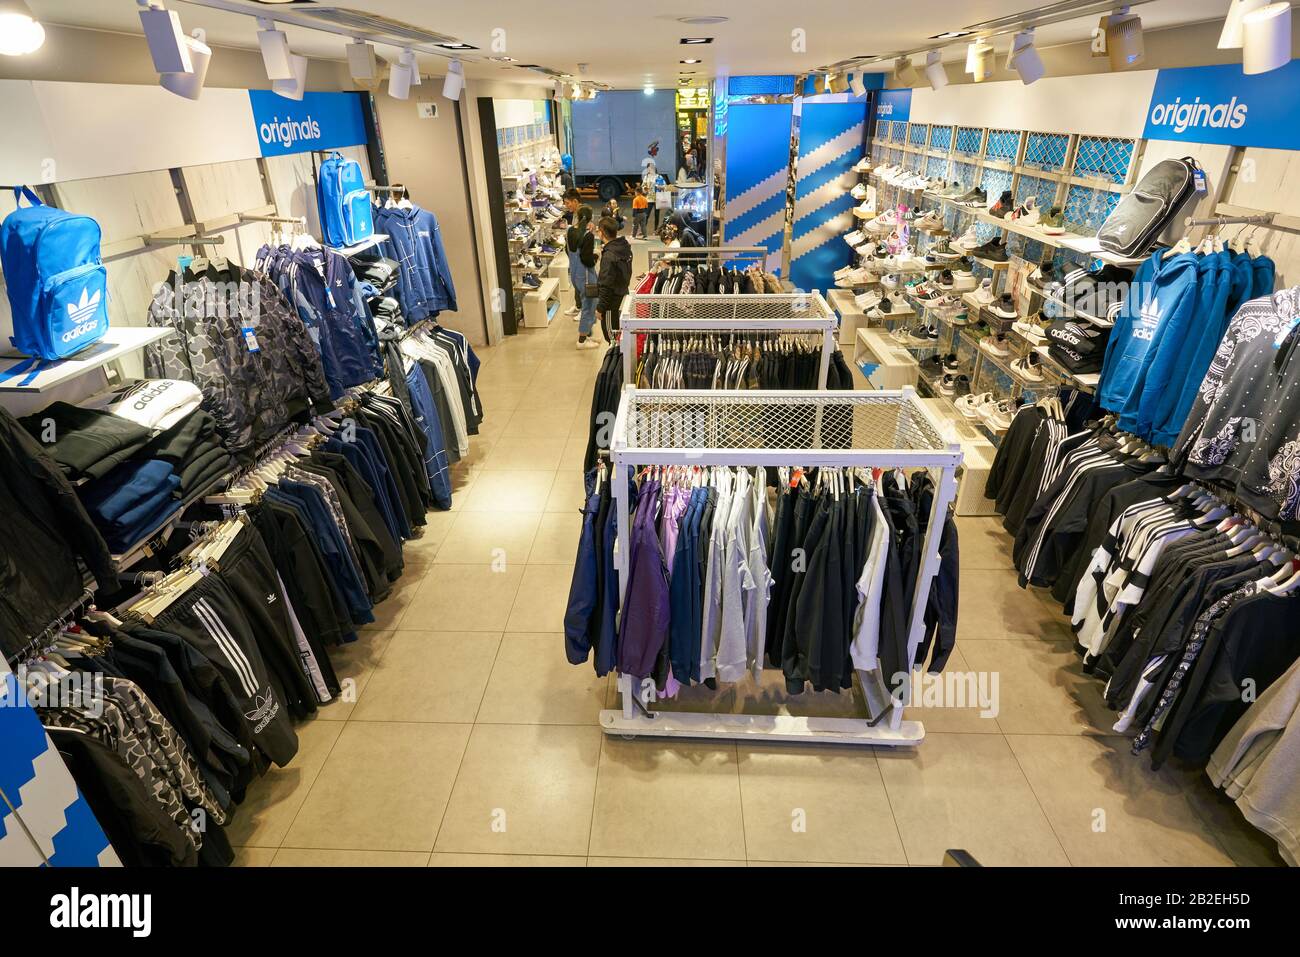 Page 3 - Adidas Clothes Shop Store High Resolution Stock Photography and  Images - Alamy